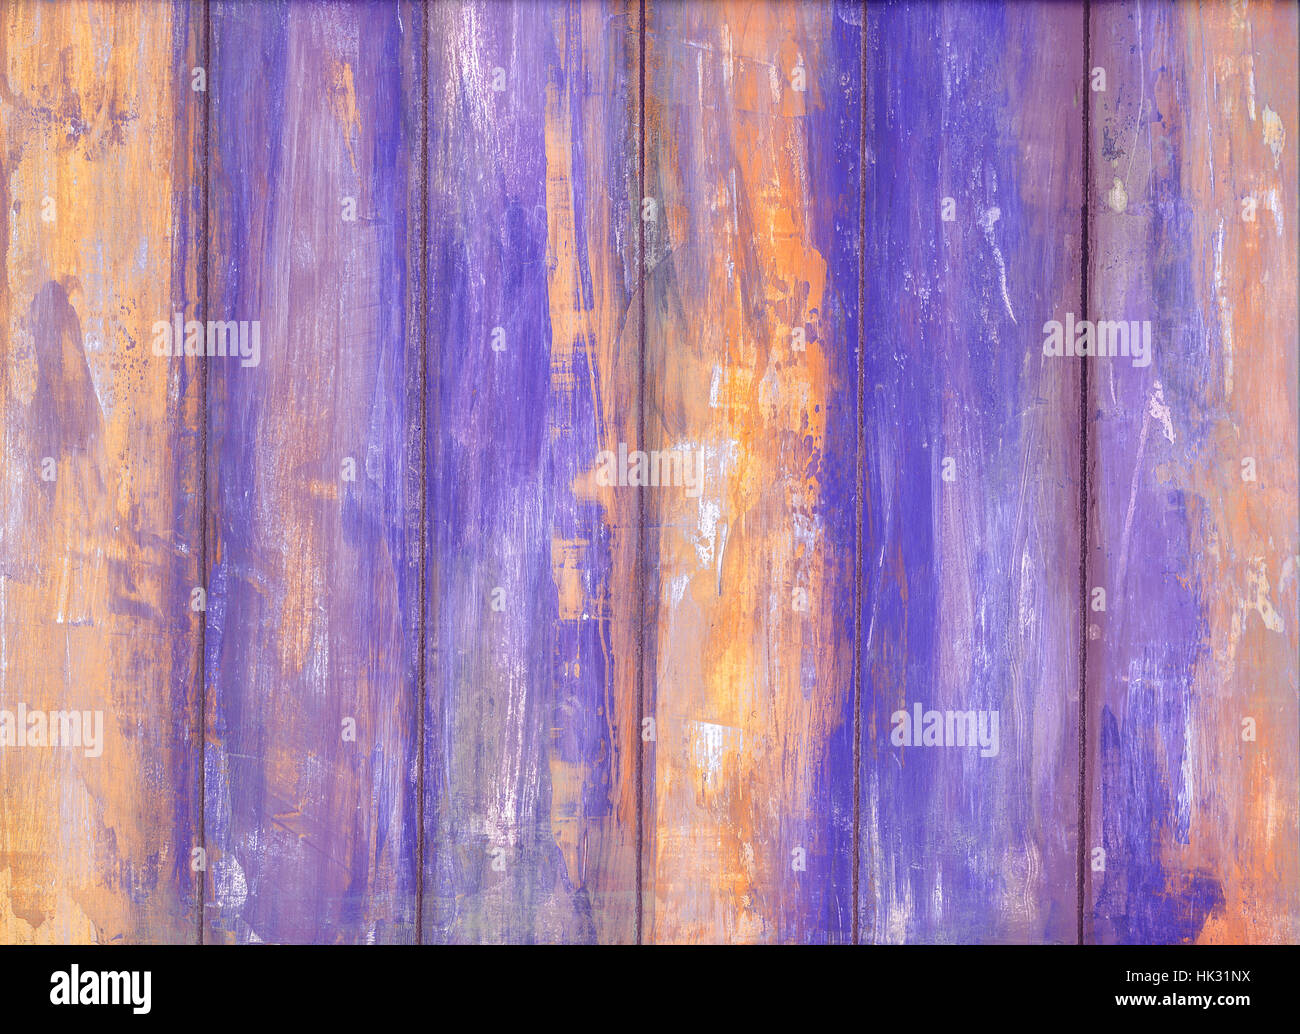 Violet or purple wooden weathered planks texture for background Stock Photo  - Alamy